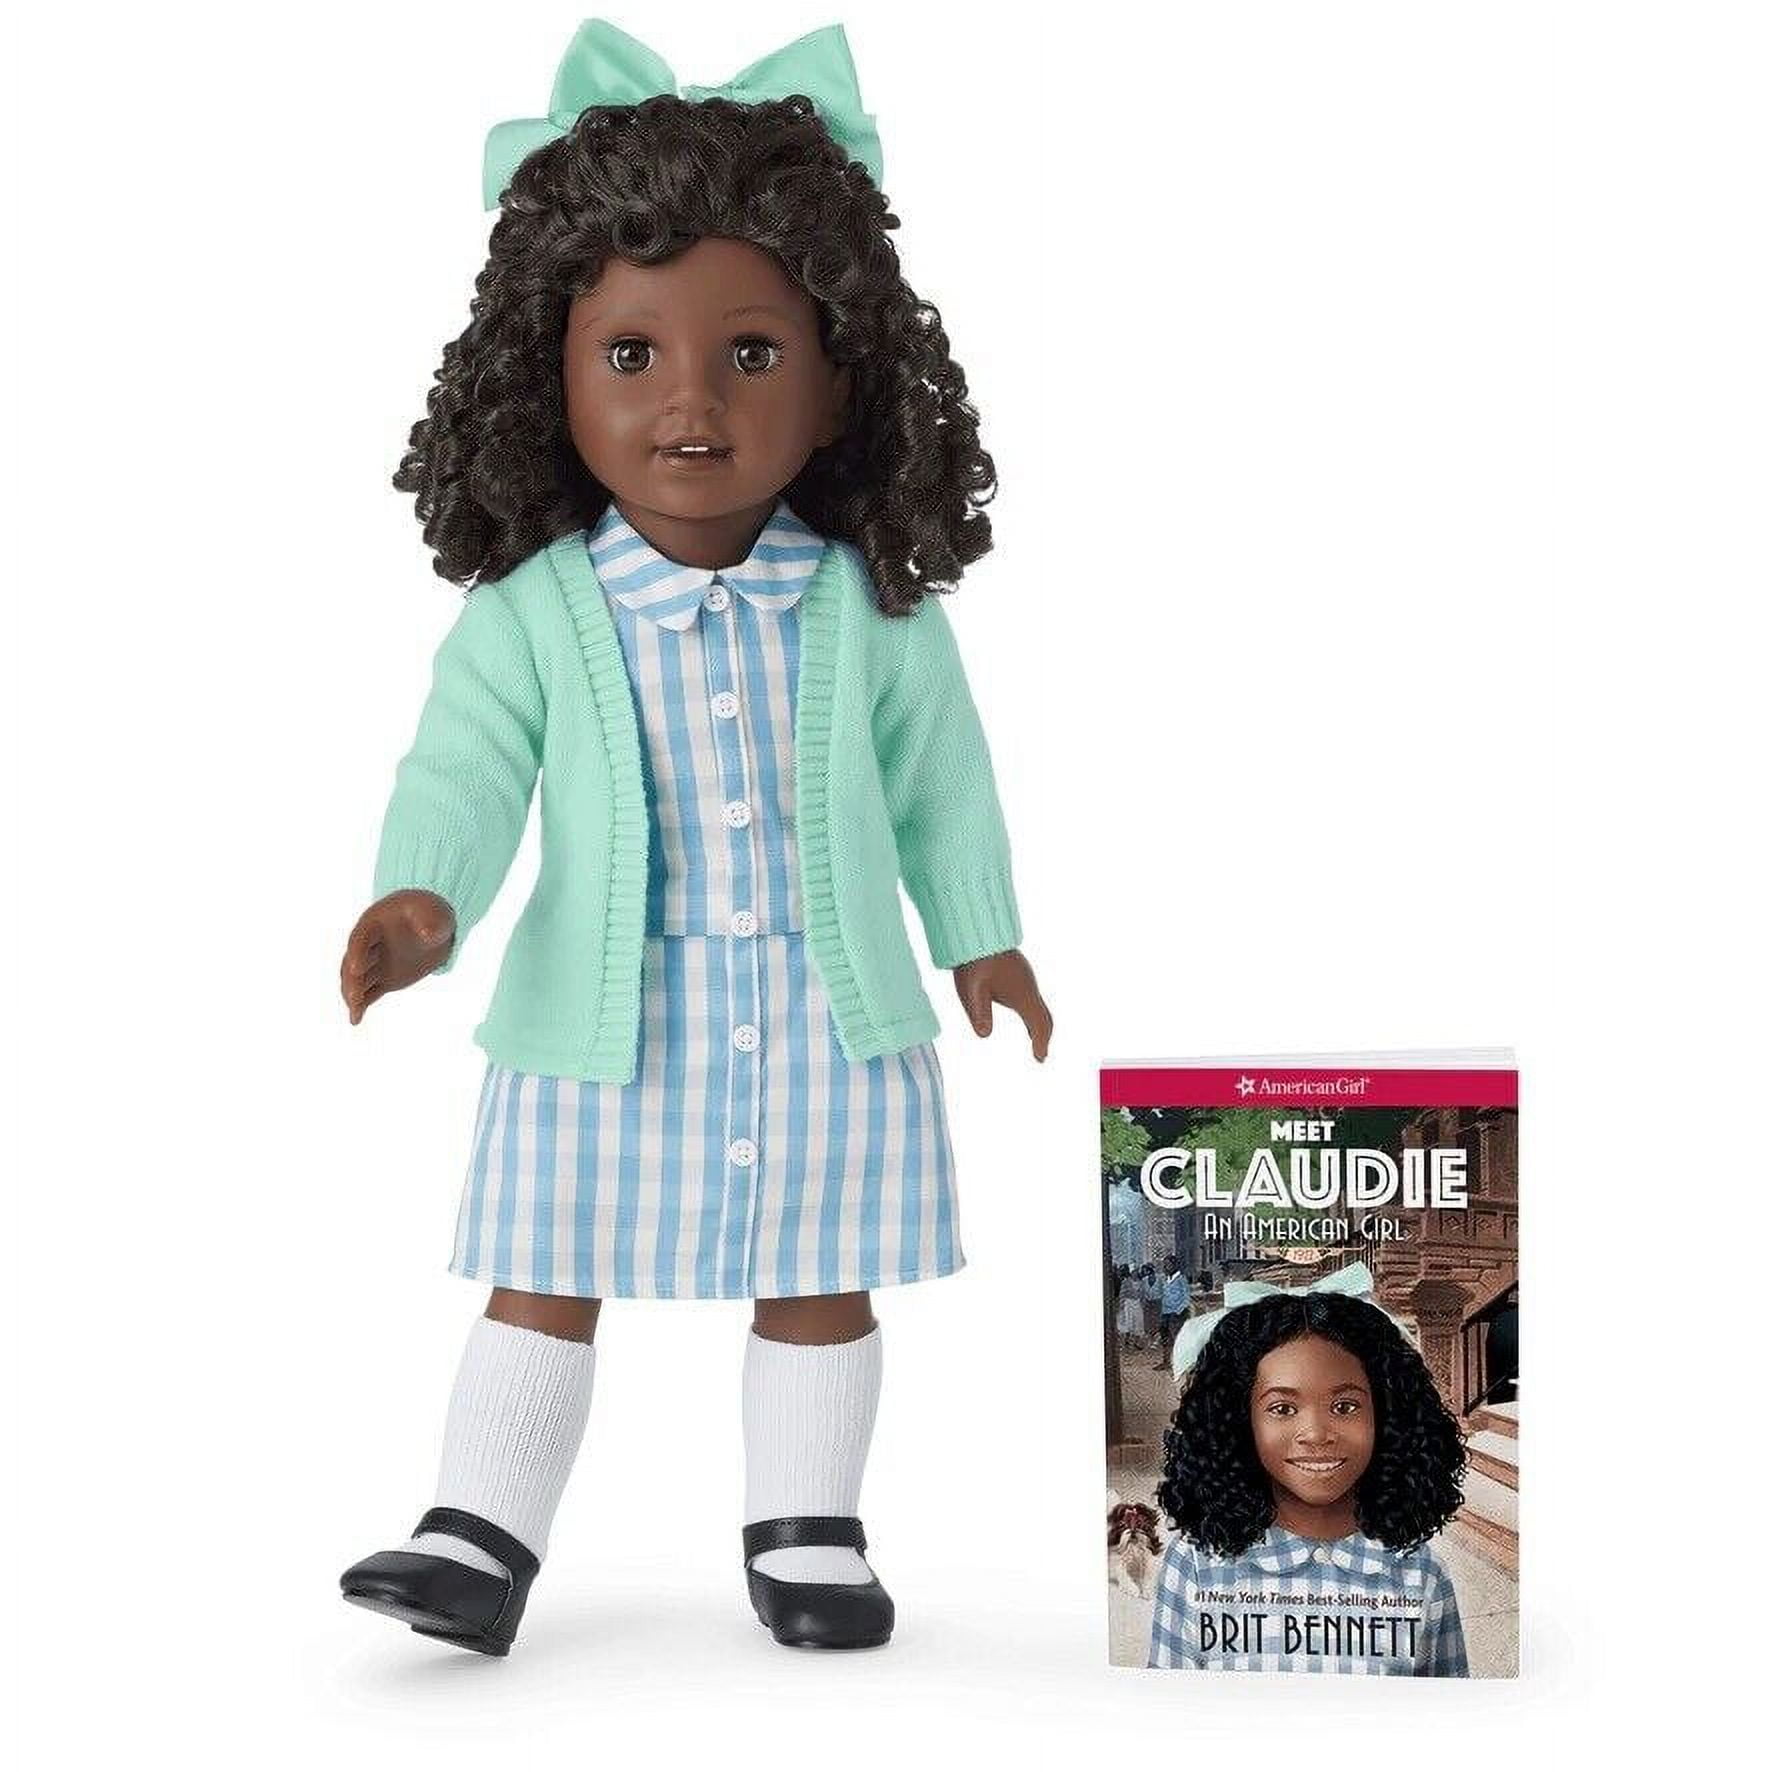  American Girl Truly Me 18-inch Doll 82 & School Day to Soccer  Play Playset with Supplies, Uniform, and Ball, For Ages 6+ : Toys & Games